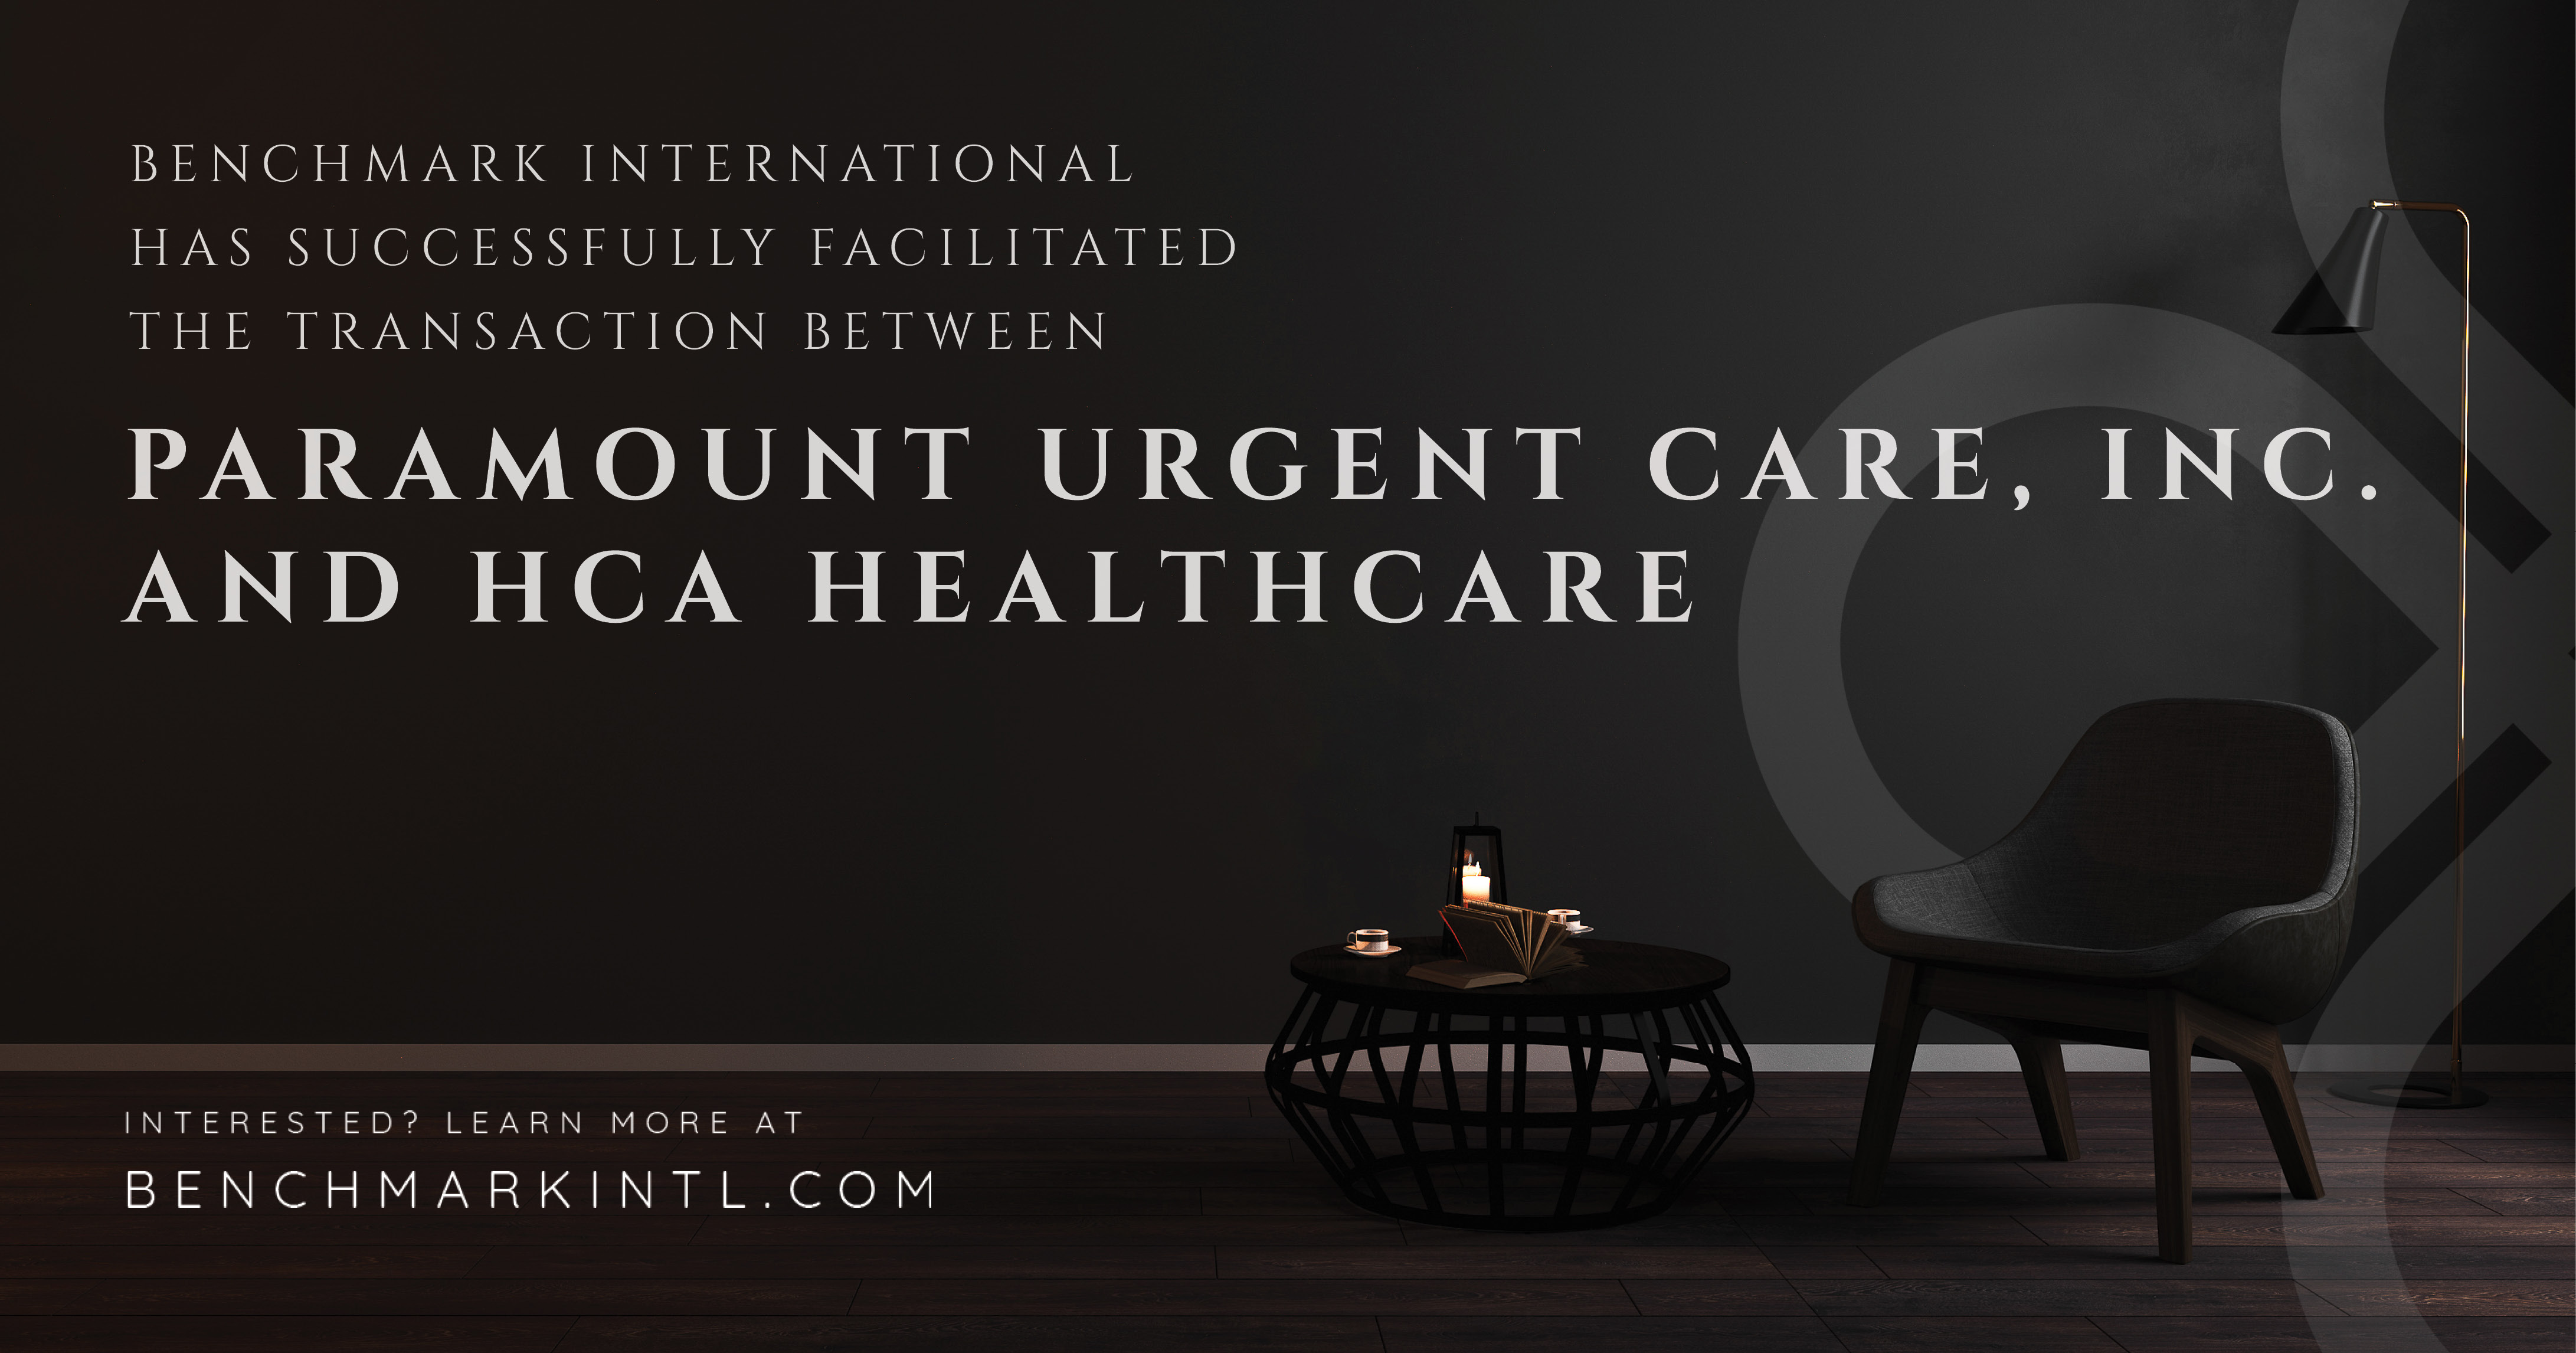 Benchmark International Successfully Facilitated a Transaction Between Paramount Urgent Care, Inc. and HCA Healthcare.